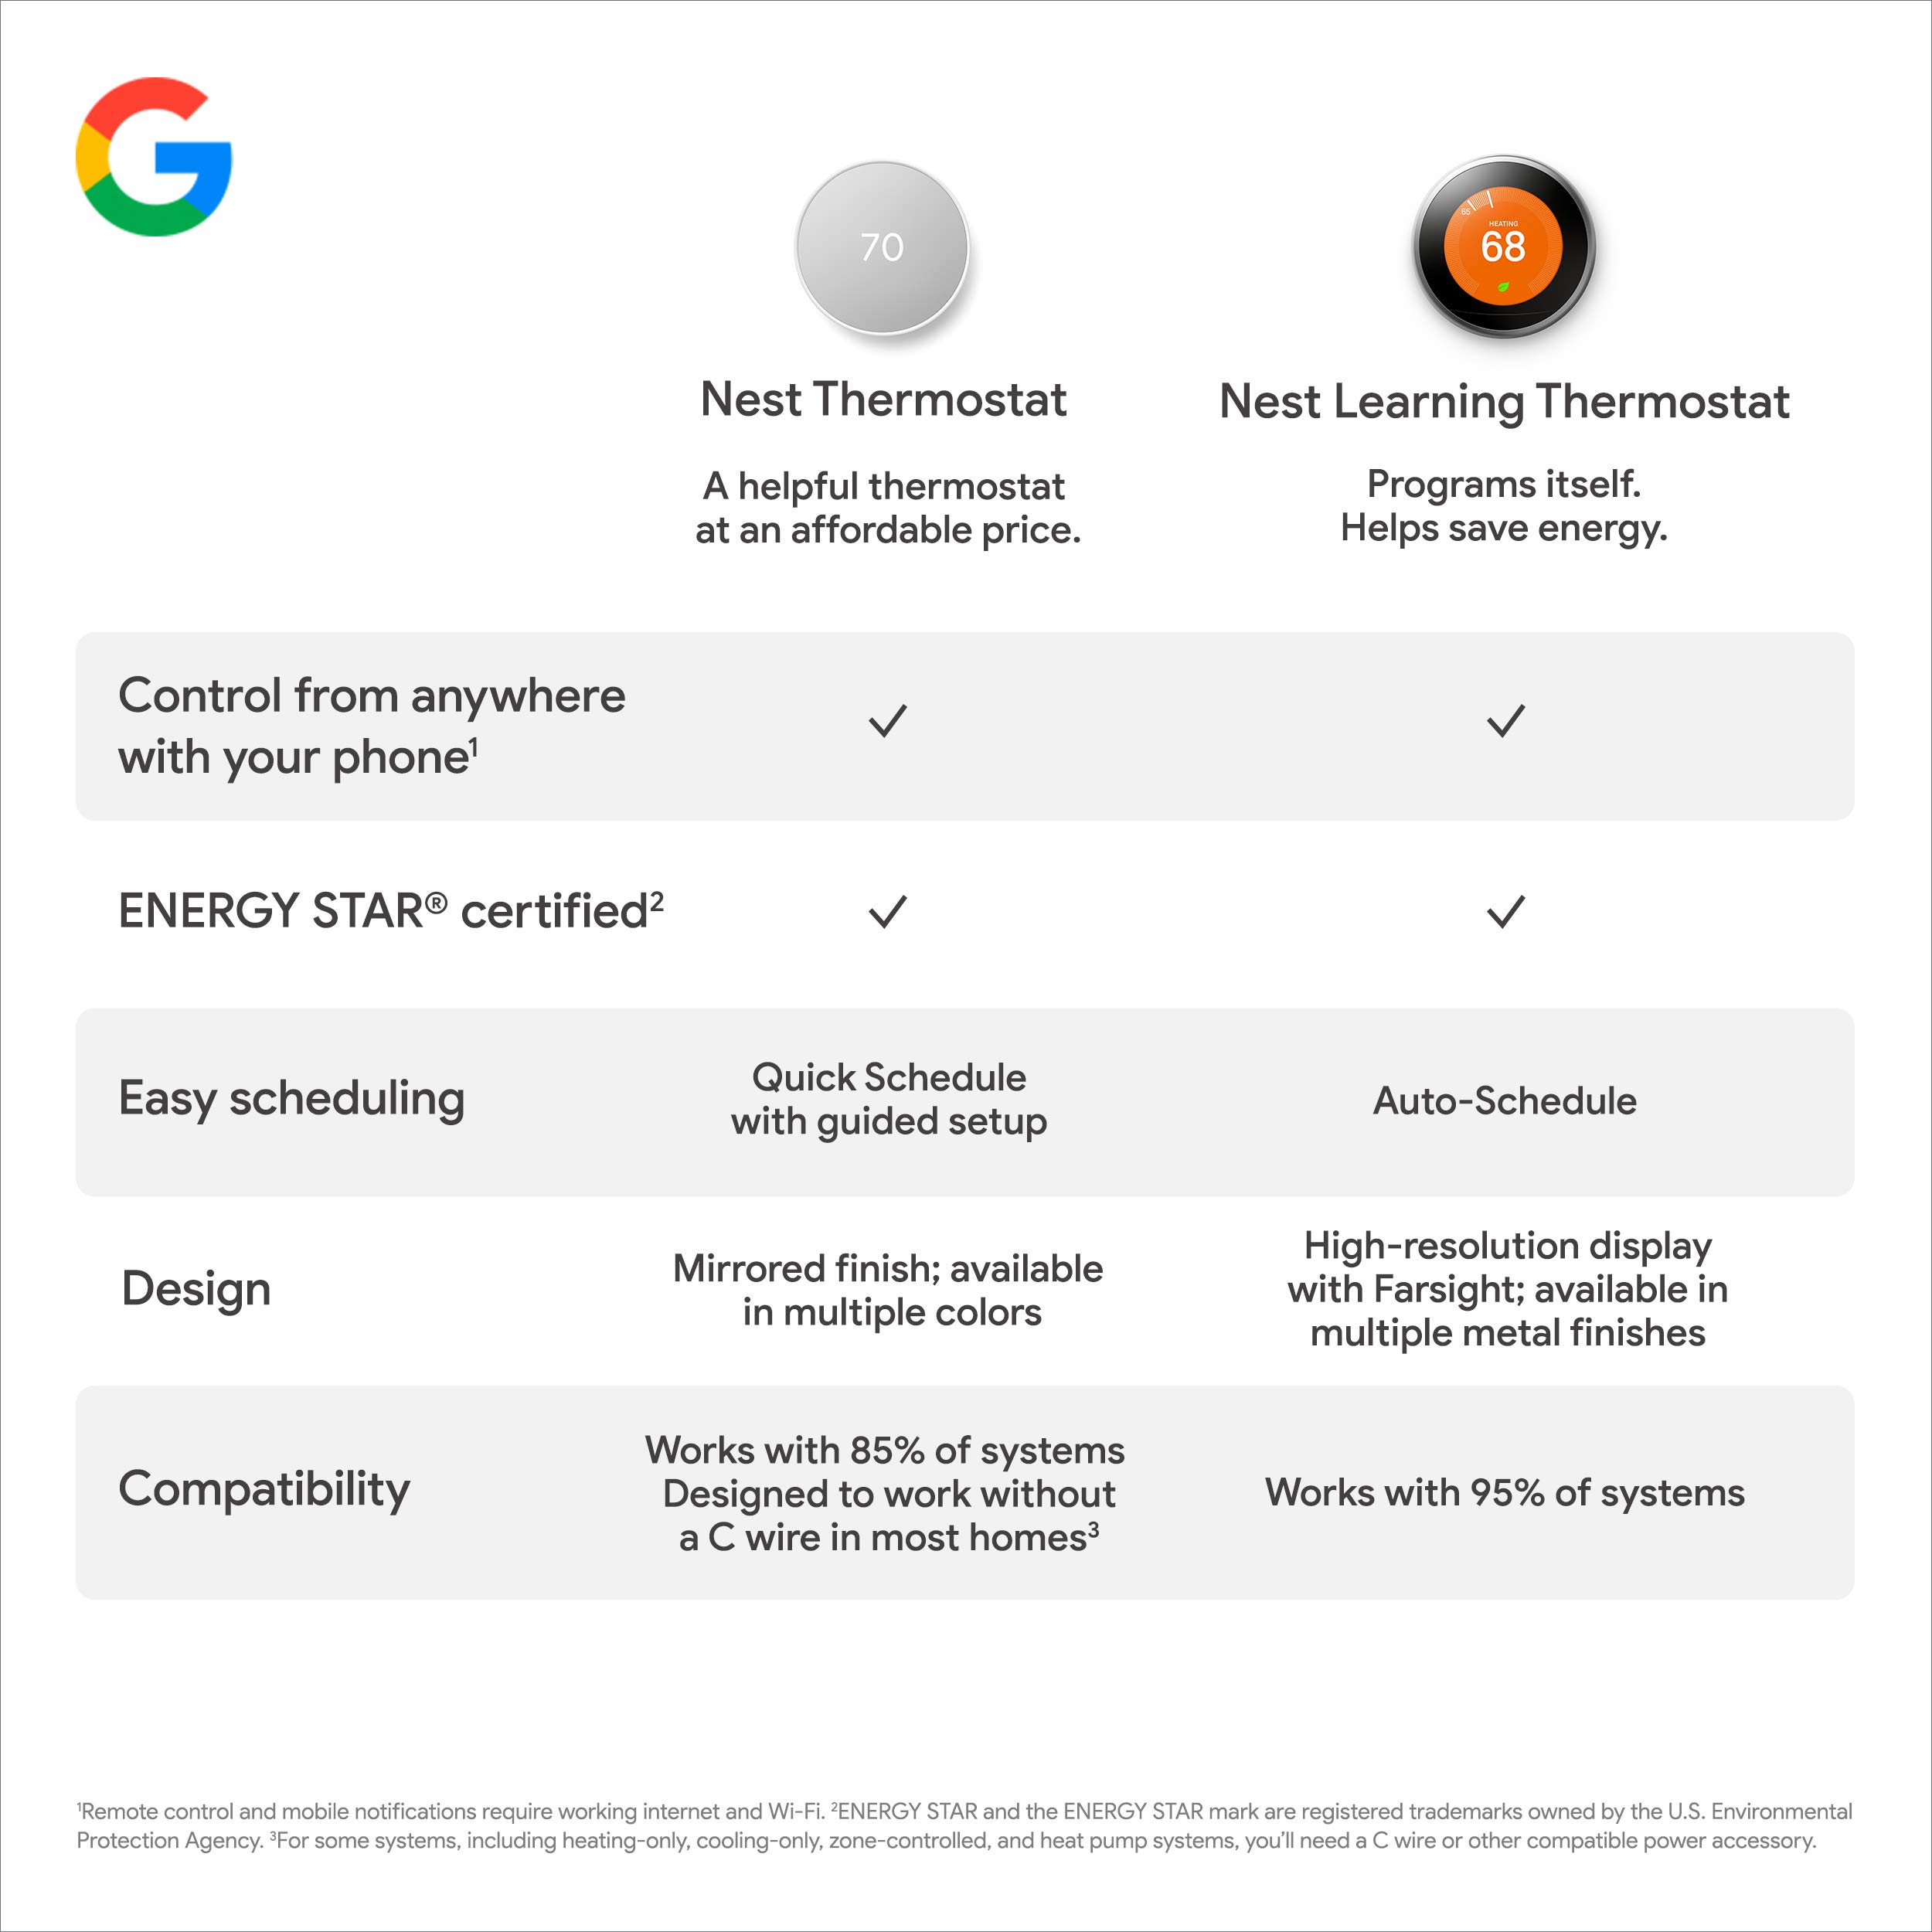 Google Nest Thermostat - Smart Thermostat for Home - Programmable Wifi Thermostat & Trim Kit - Made for the Nest Thermostat - Programmable Wifi Thermostat Accessory - Sand